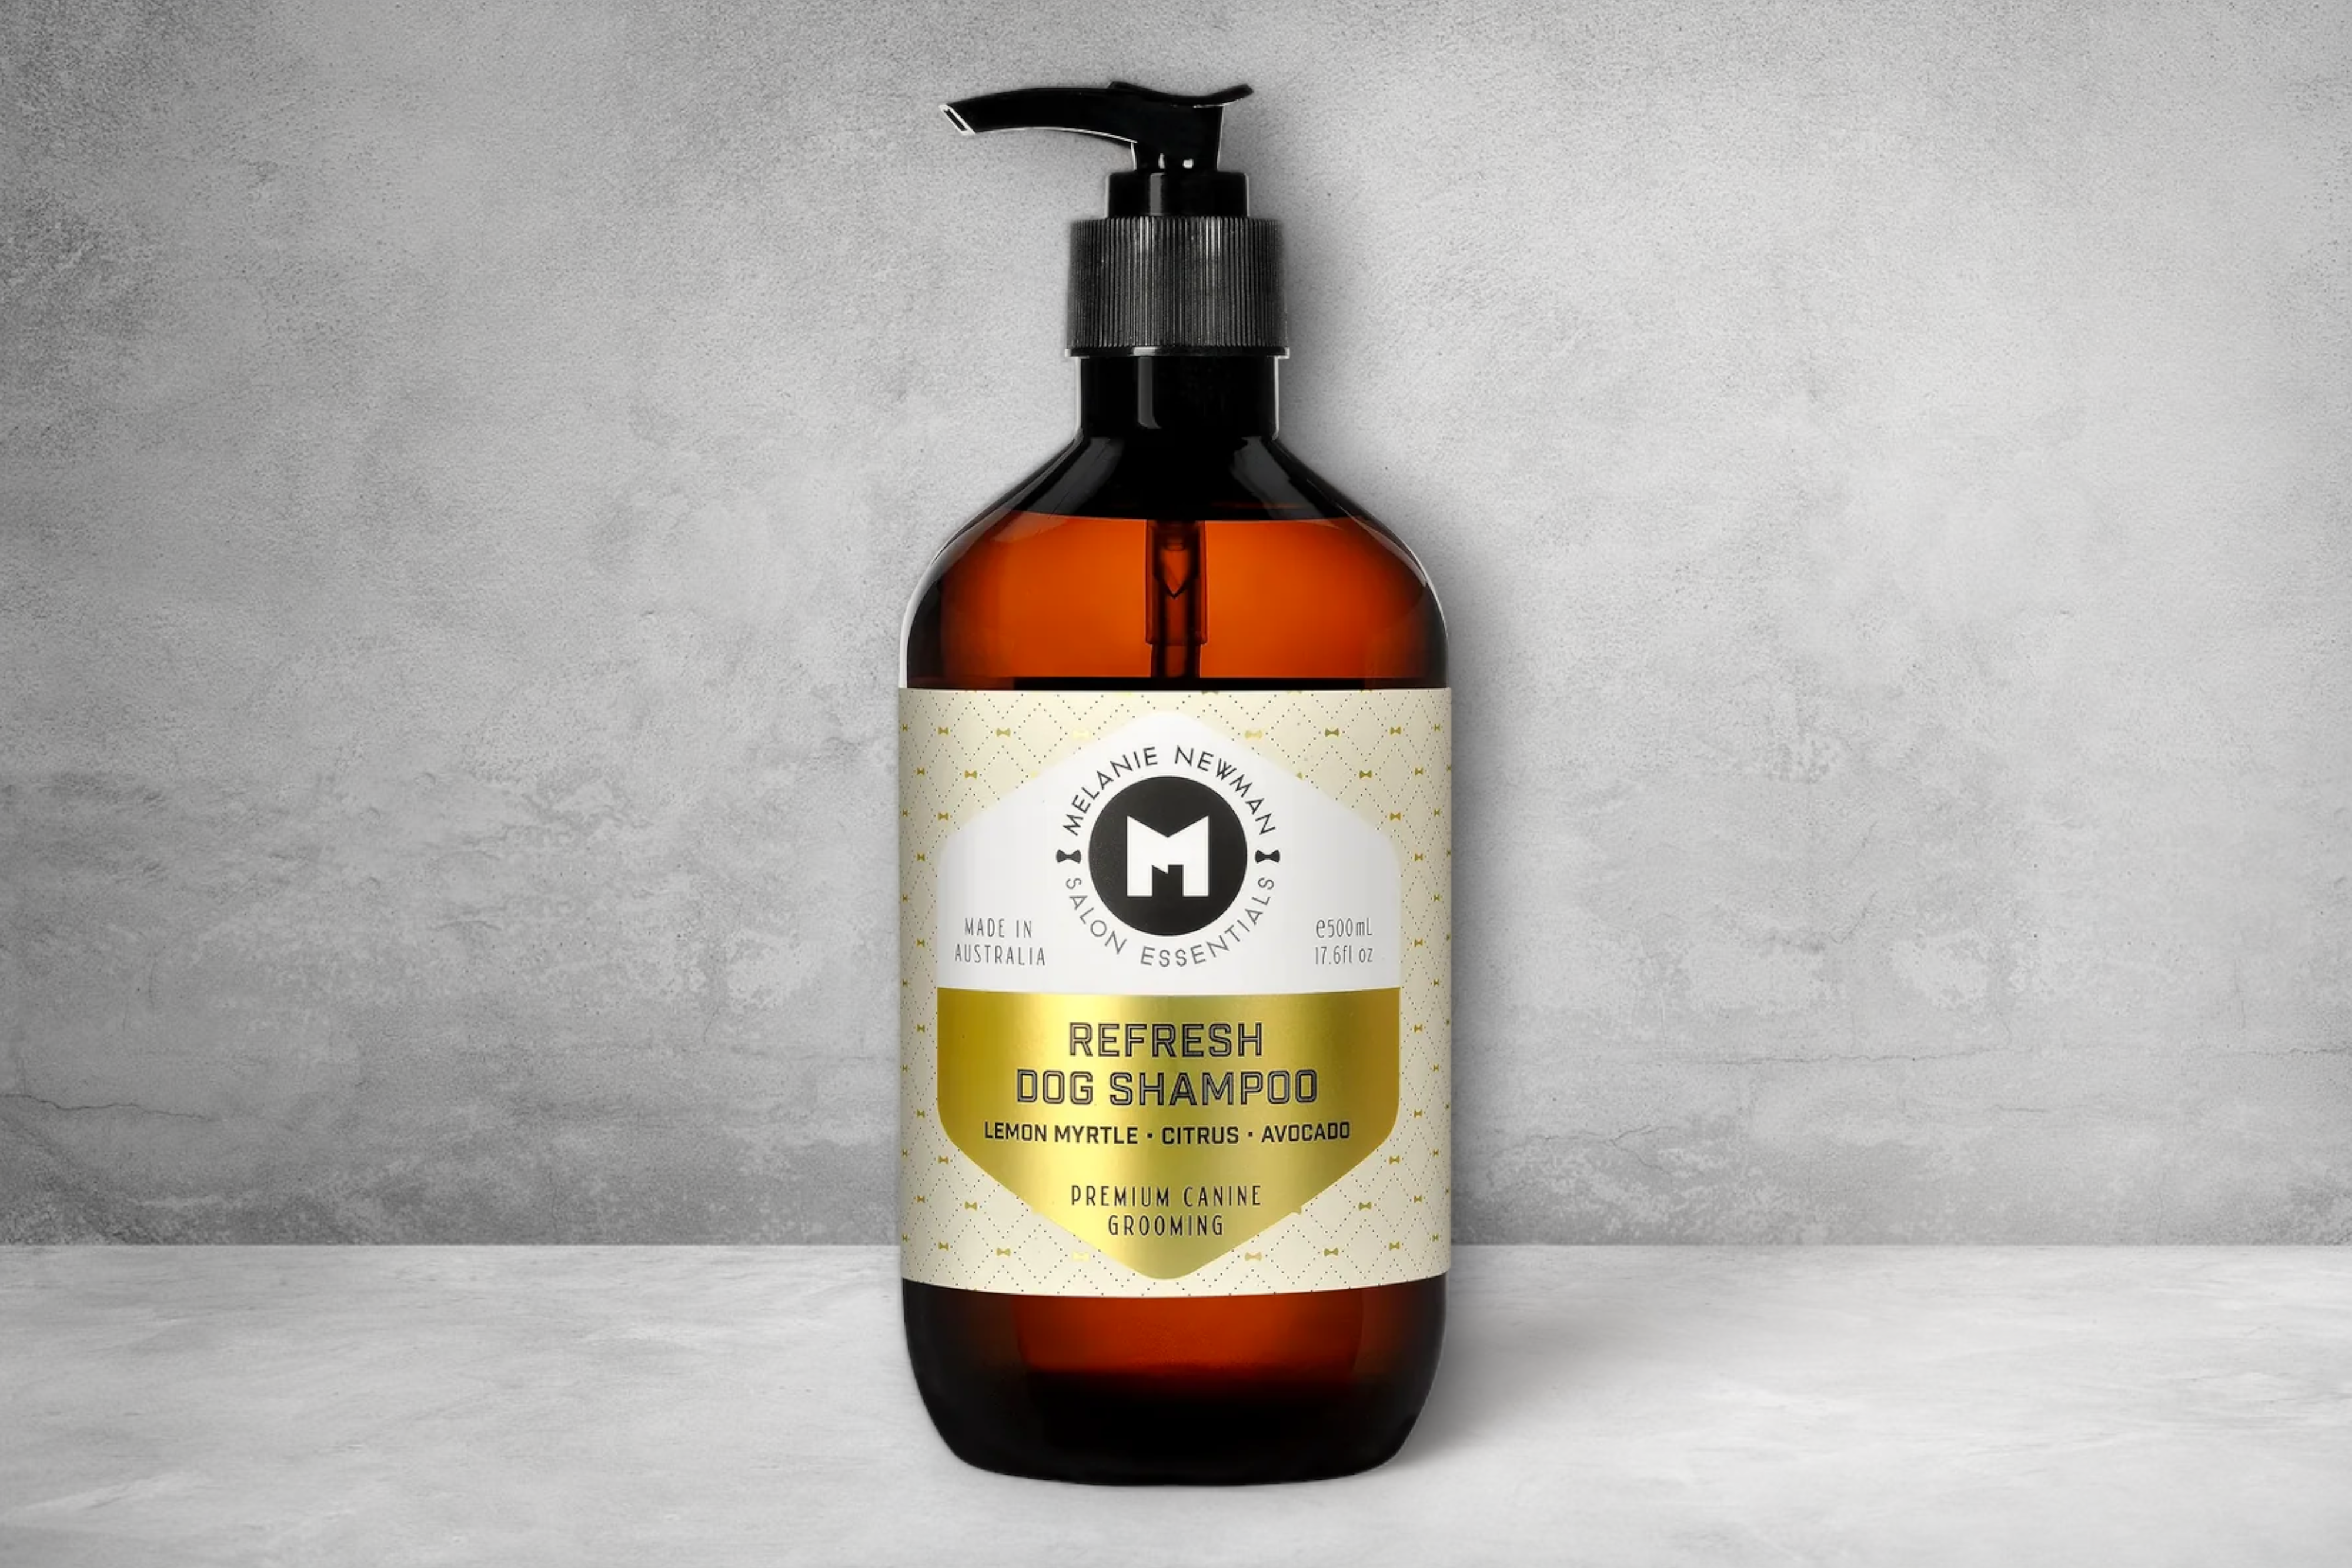 A bottle of "Refresh Dog Shampoo by Melanie Newman" featuring Australian lemon myrtle and avocado oil scents, presented against a simple grey background, emphasizing its premium grooming properties for double-coated breeds.